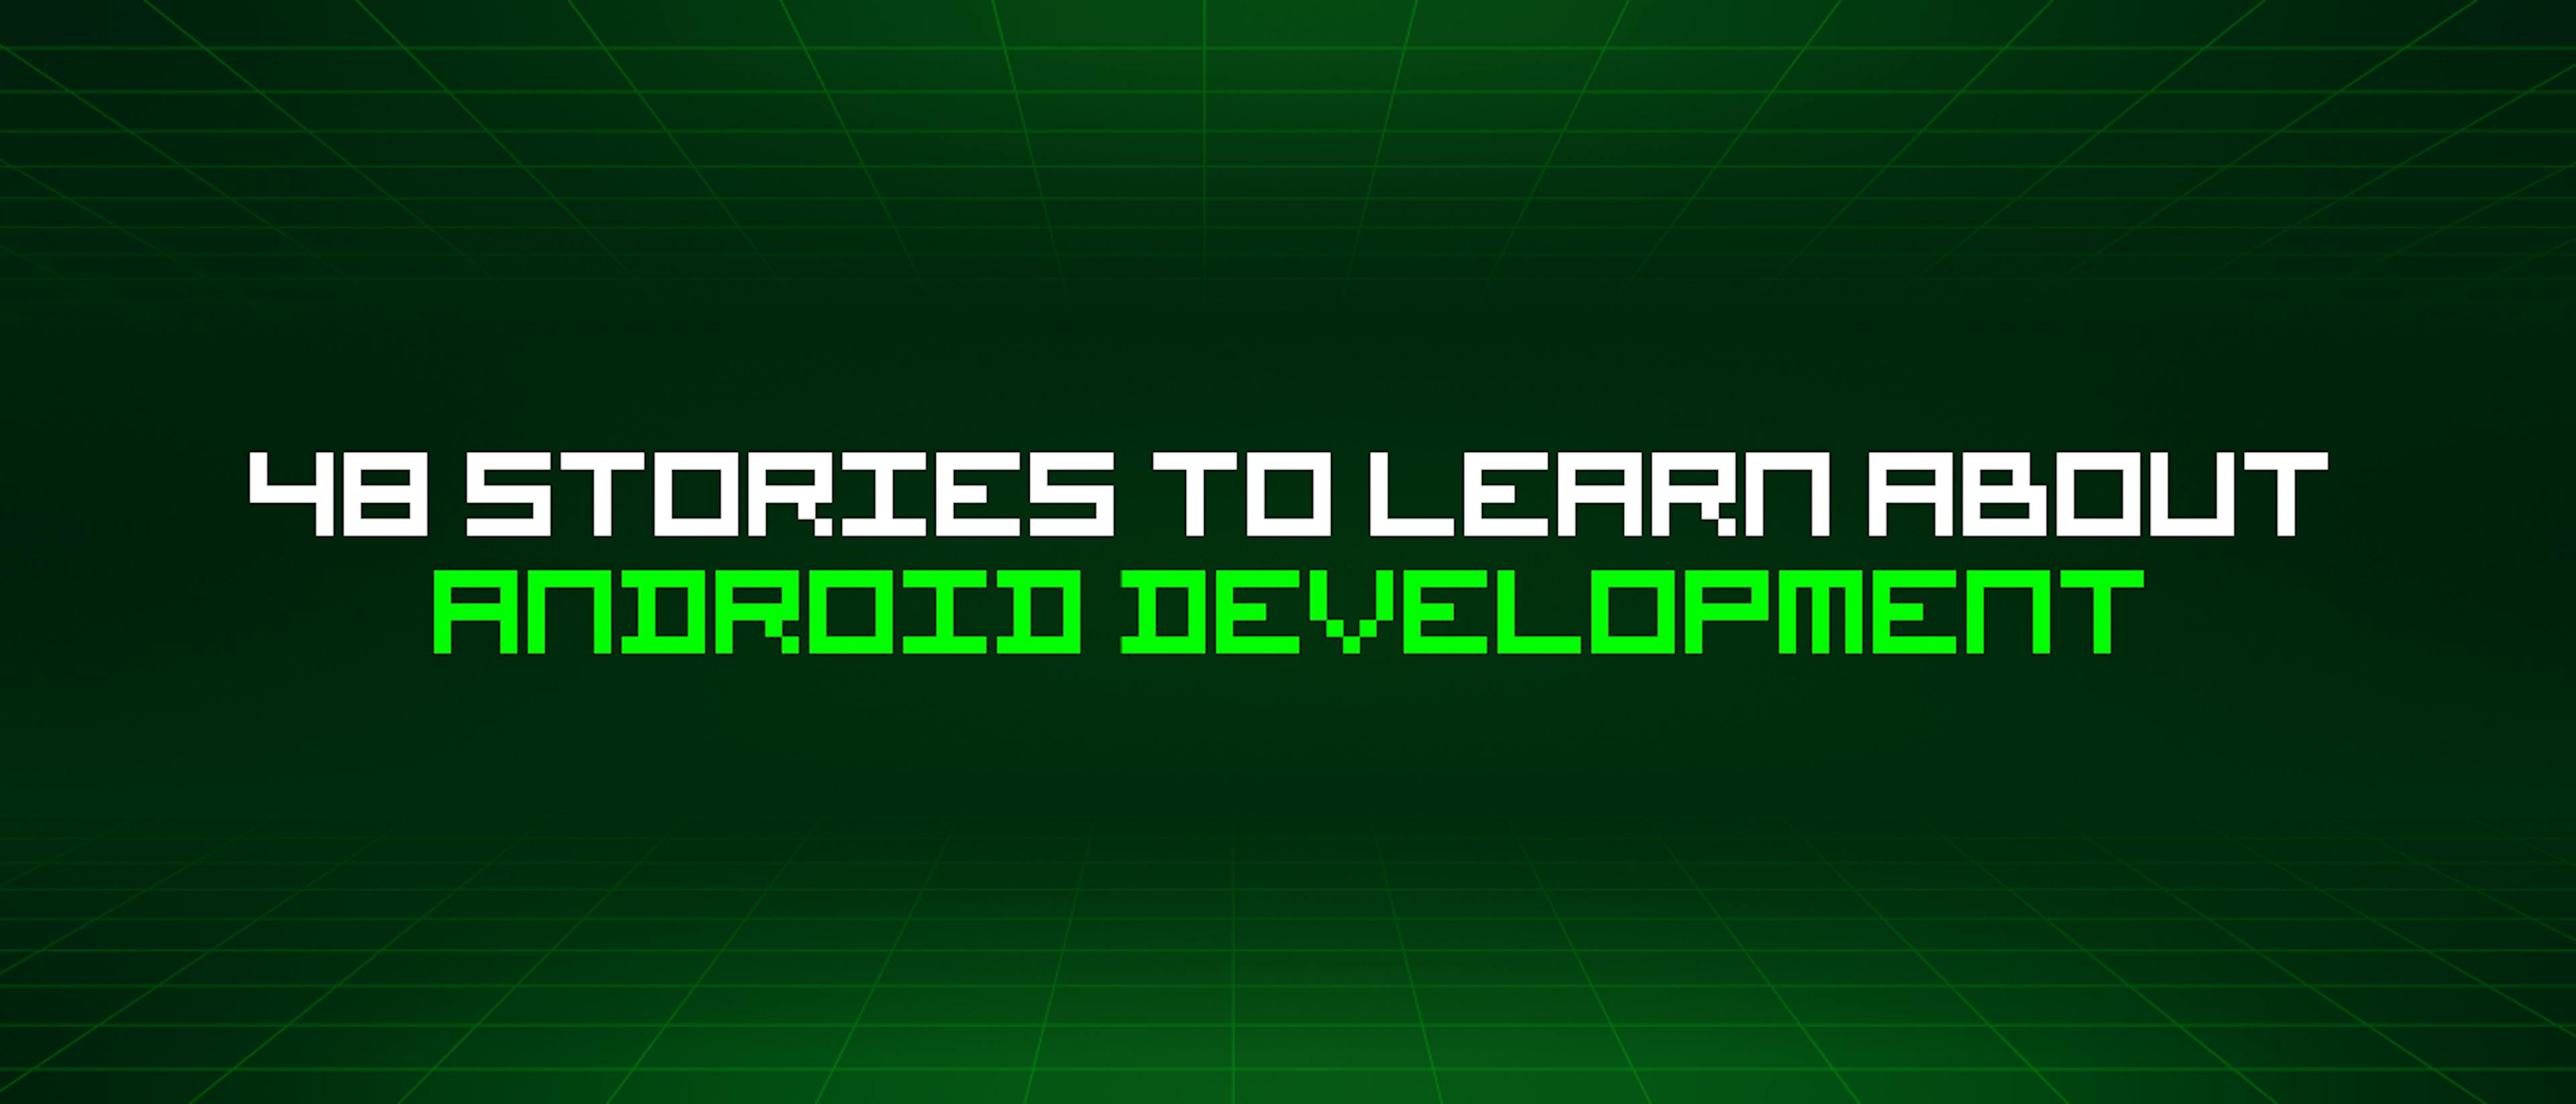 featured image - 48 Stories To Learn About Android Development